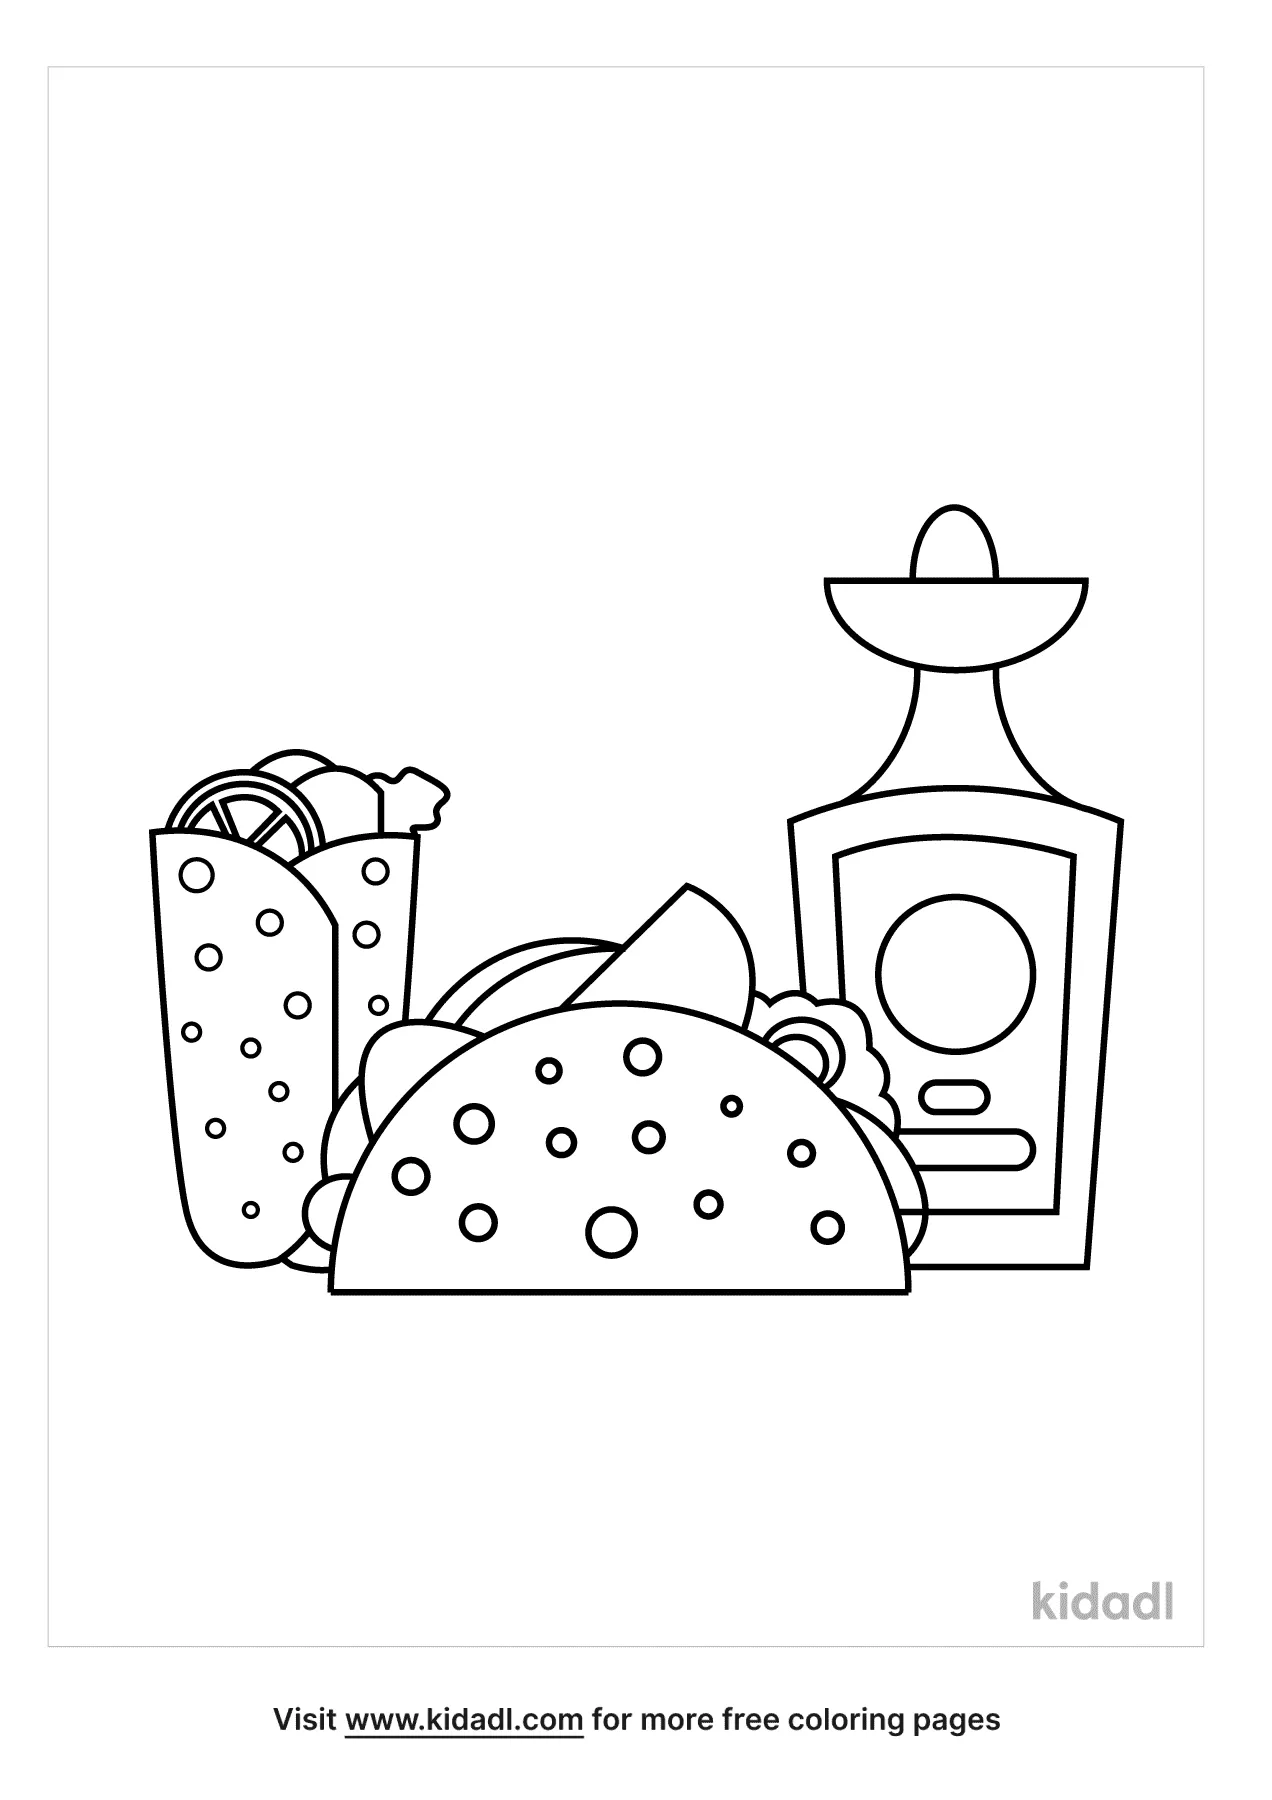 printable mexican food coloring pages